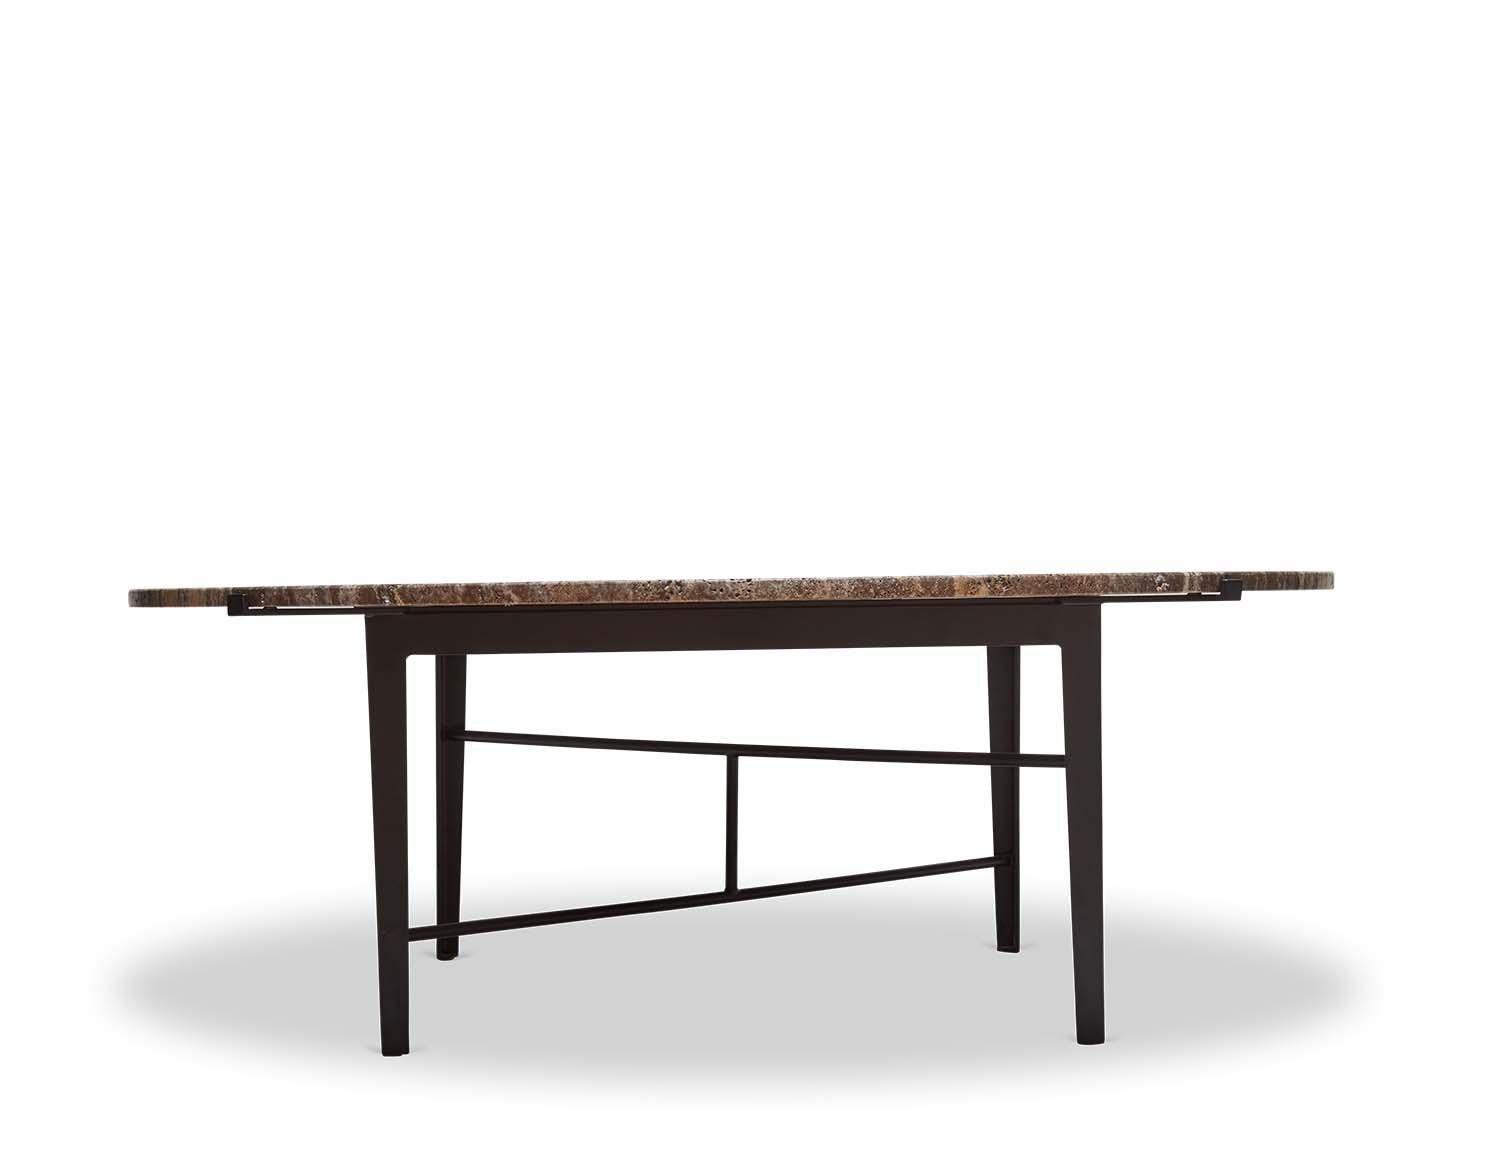 The Montrose coffee table is an open-grain honed travertine coffee table with a matte black powder coated steel base. For indoor or outdoor use.

The Lawson-Fenning Collection is designed and handmade in Los Angeles, California.

Message us to find